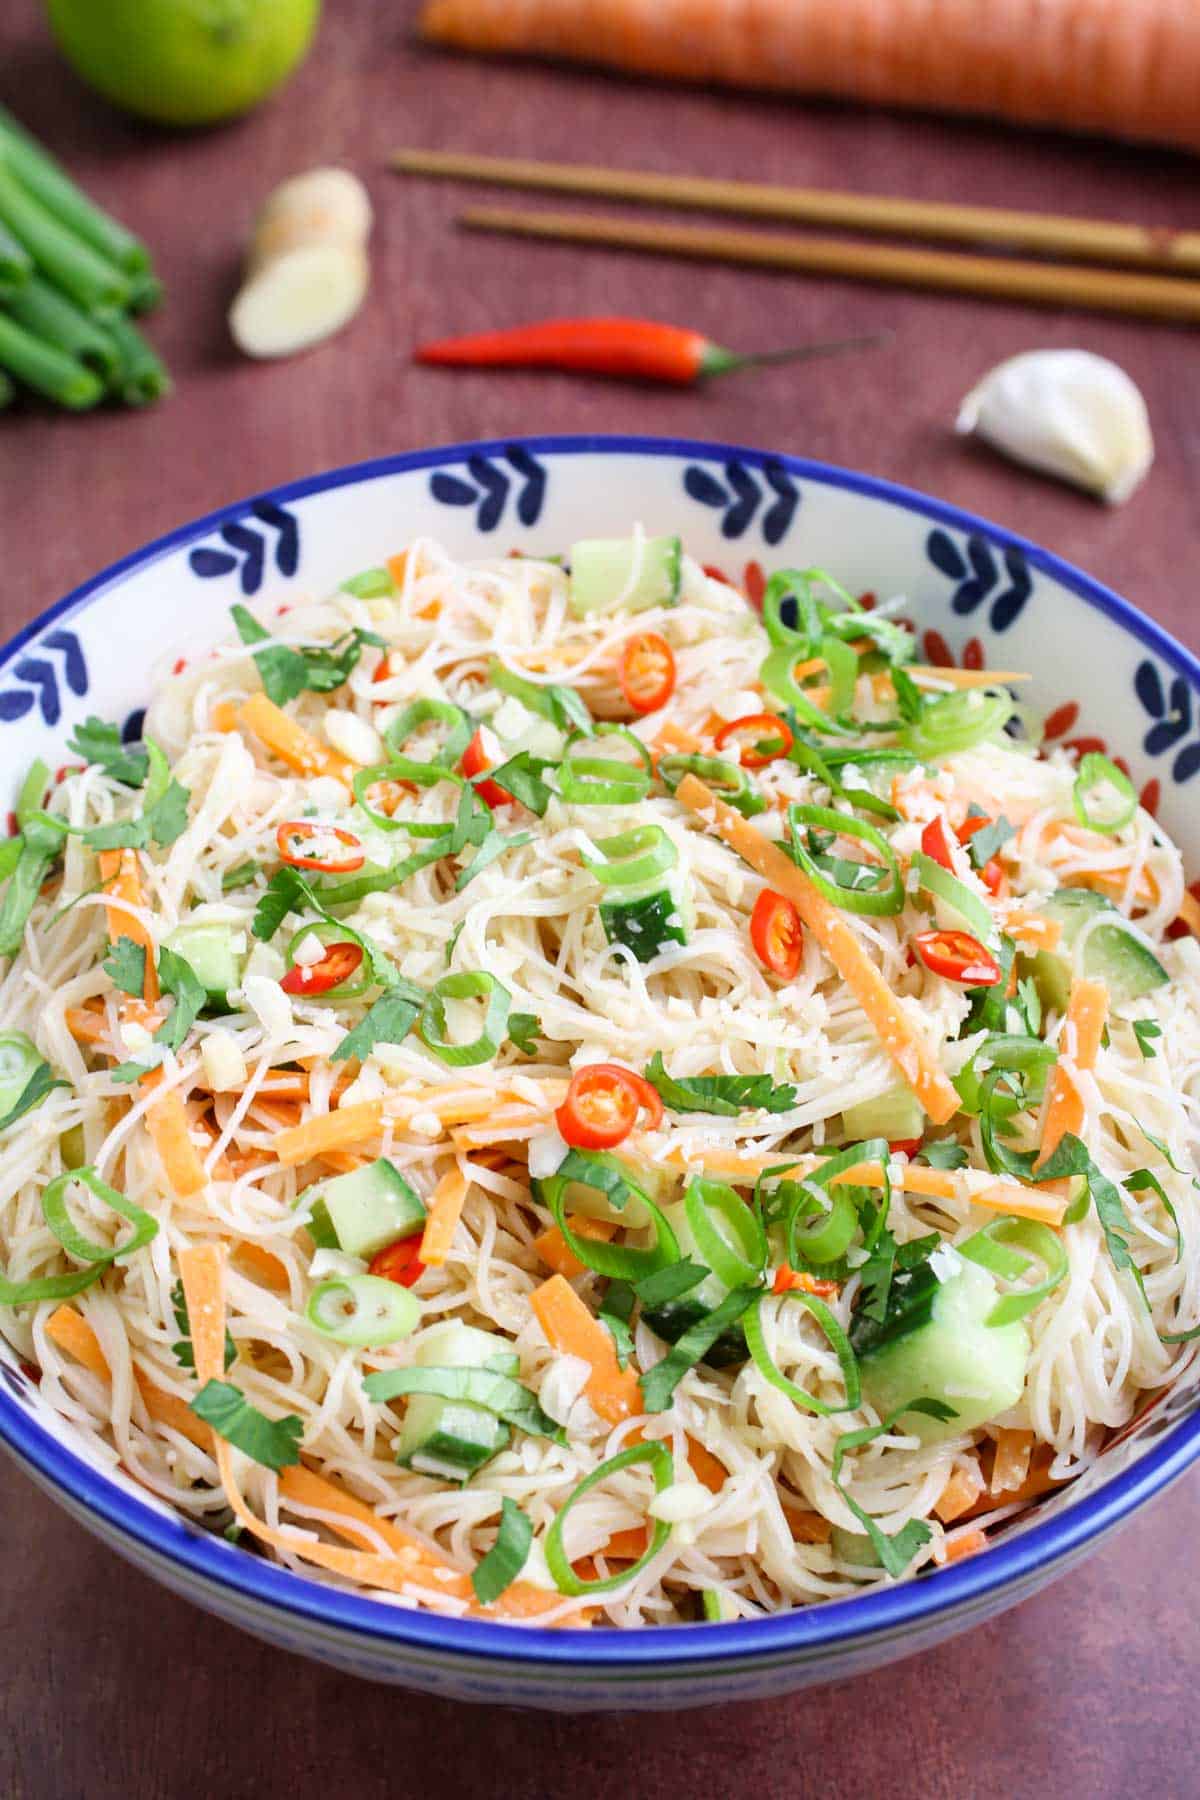 Vermicelli Rice Noodle Salad with Peanut Dressing in Bowl.